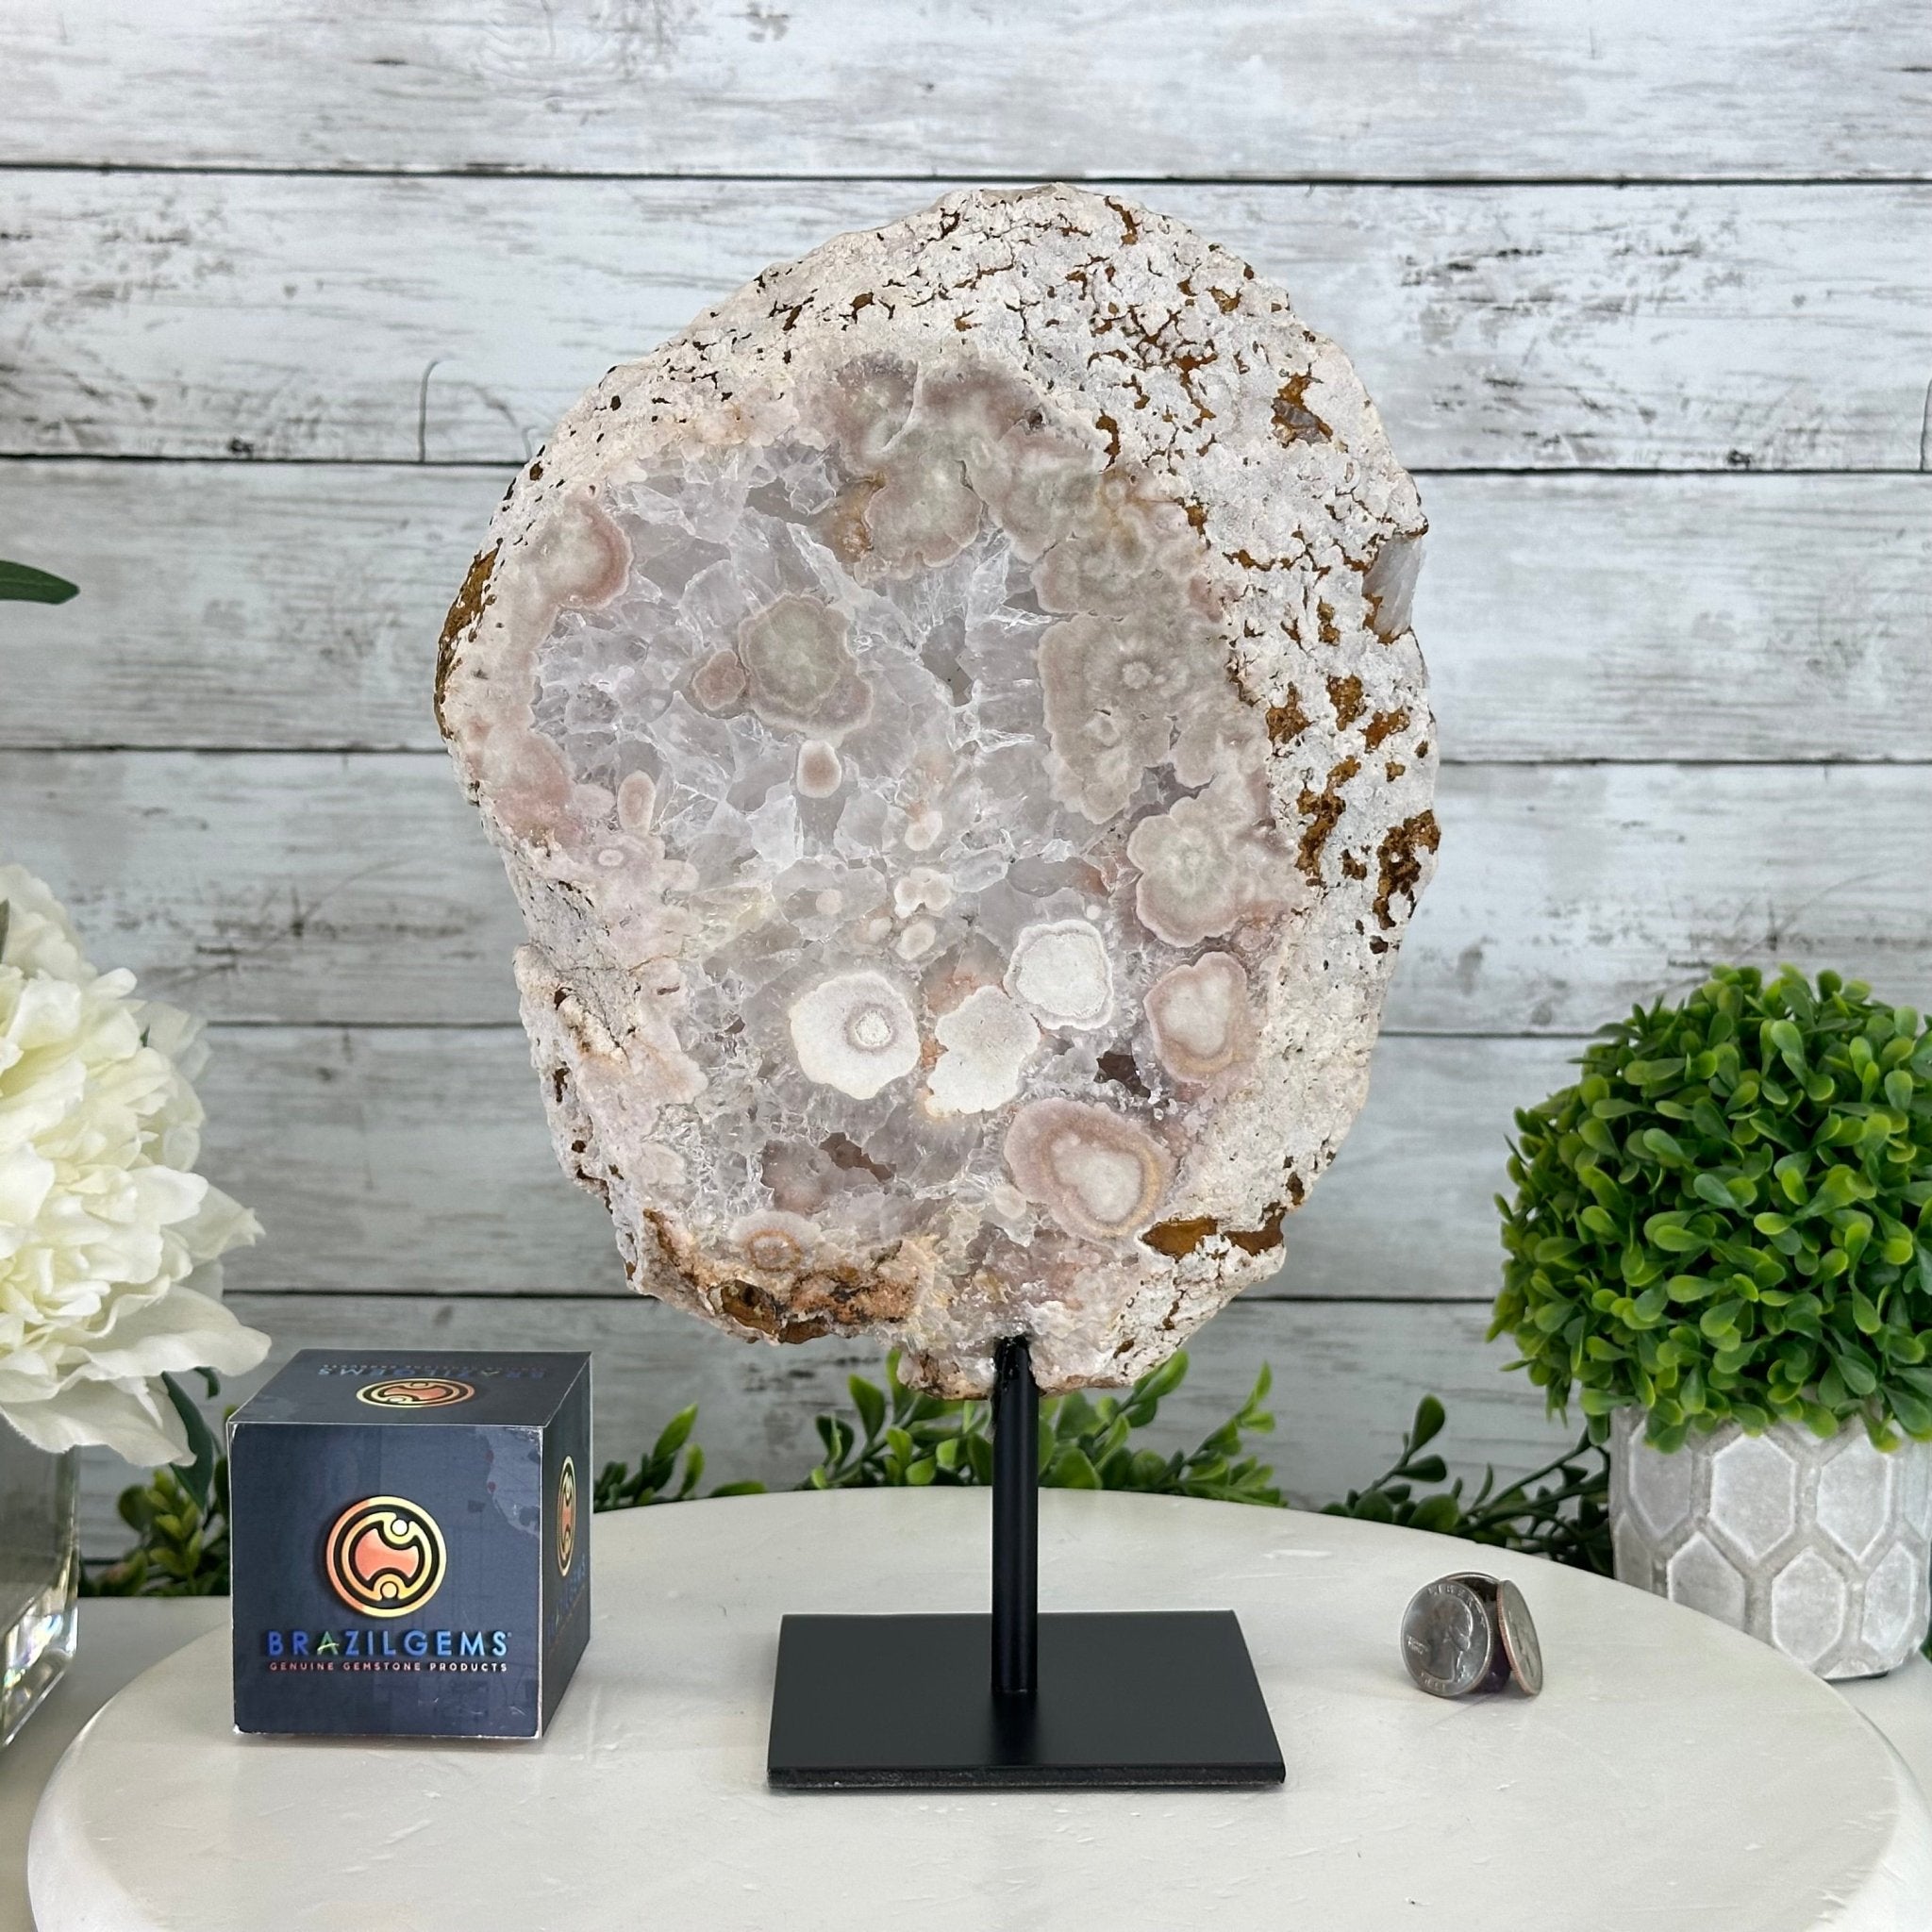 Polished Pink Amethyst Slice on a Stand, 5.4 lbs & 12.4" Tall #5743-0028 - Brazil GemsBrazil GemsPolished Pink Amethyst Slice on a Stand, 5.4 lbs & 12.4" Tall #5743-0028Slices on Fixed Bases5743-0028